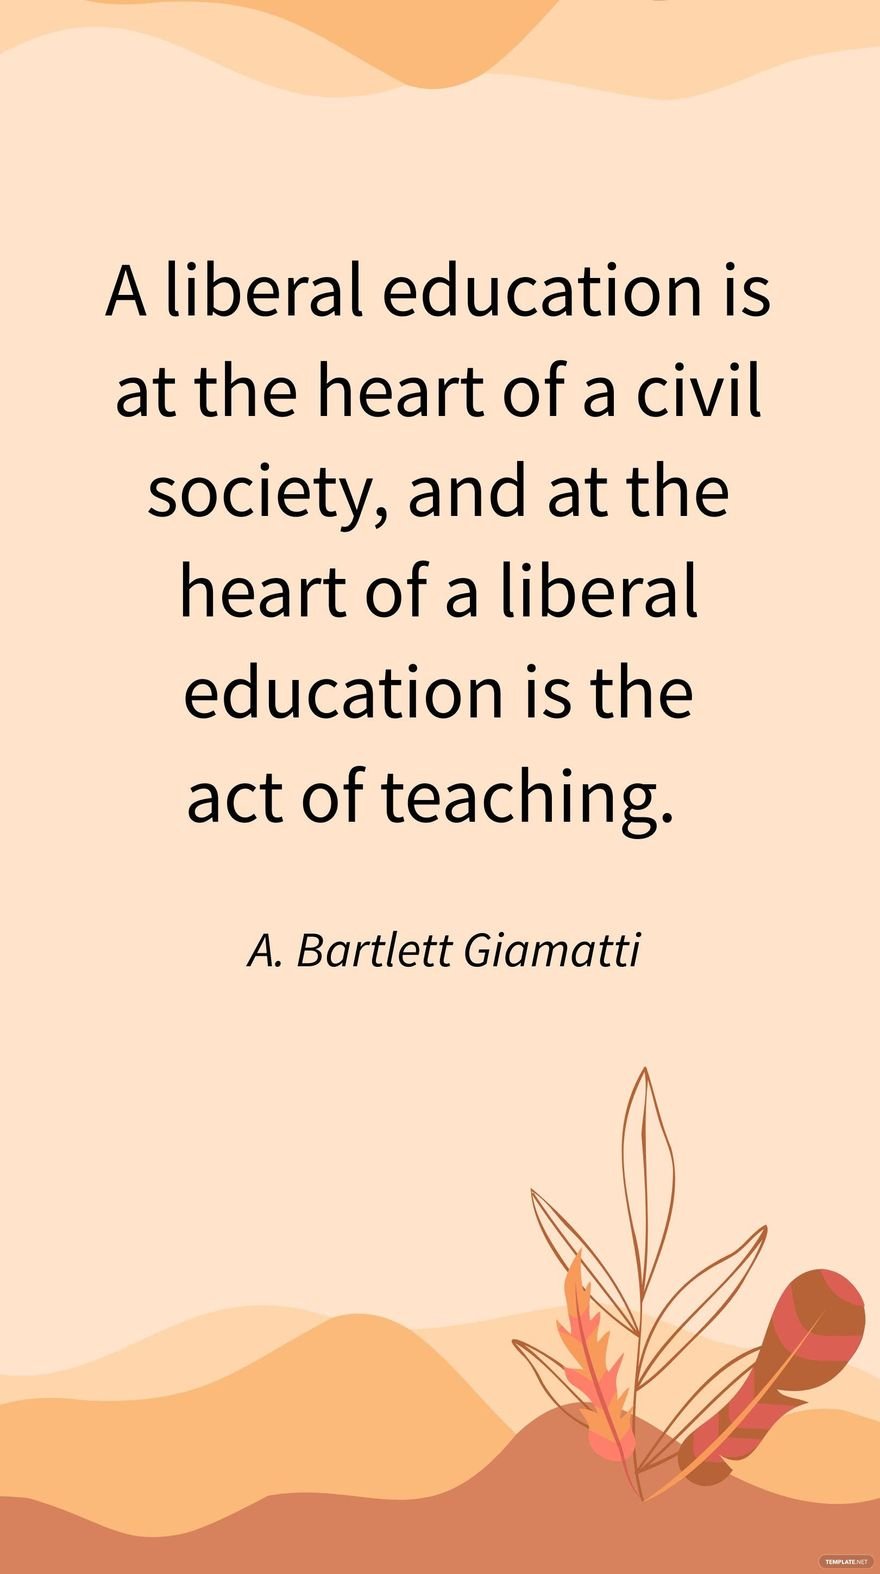 A. Bartlett Giamatti - A liberal education is at the heart of a civil society, and at the heart of a liberal education is the act of teaching.